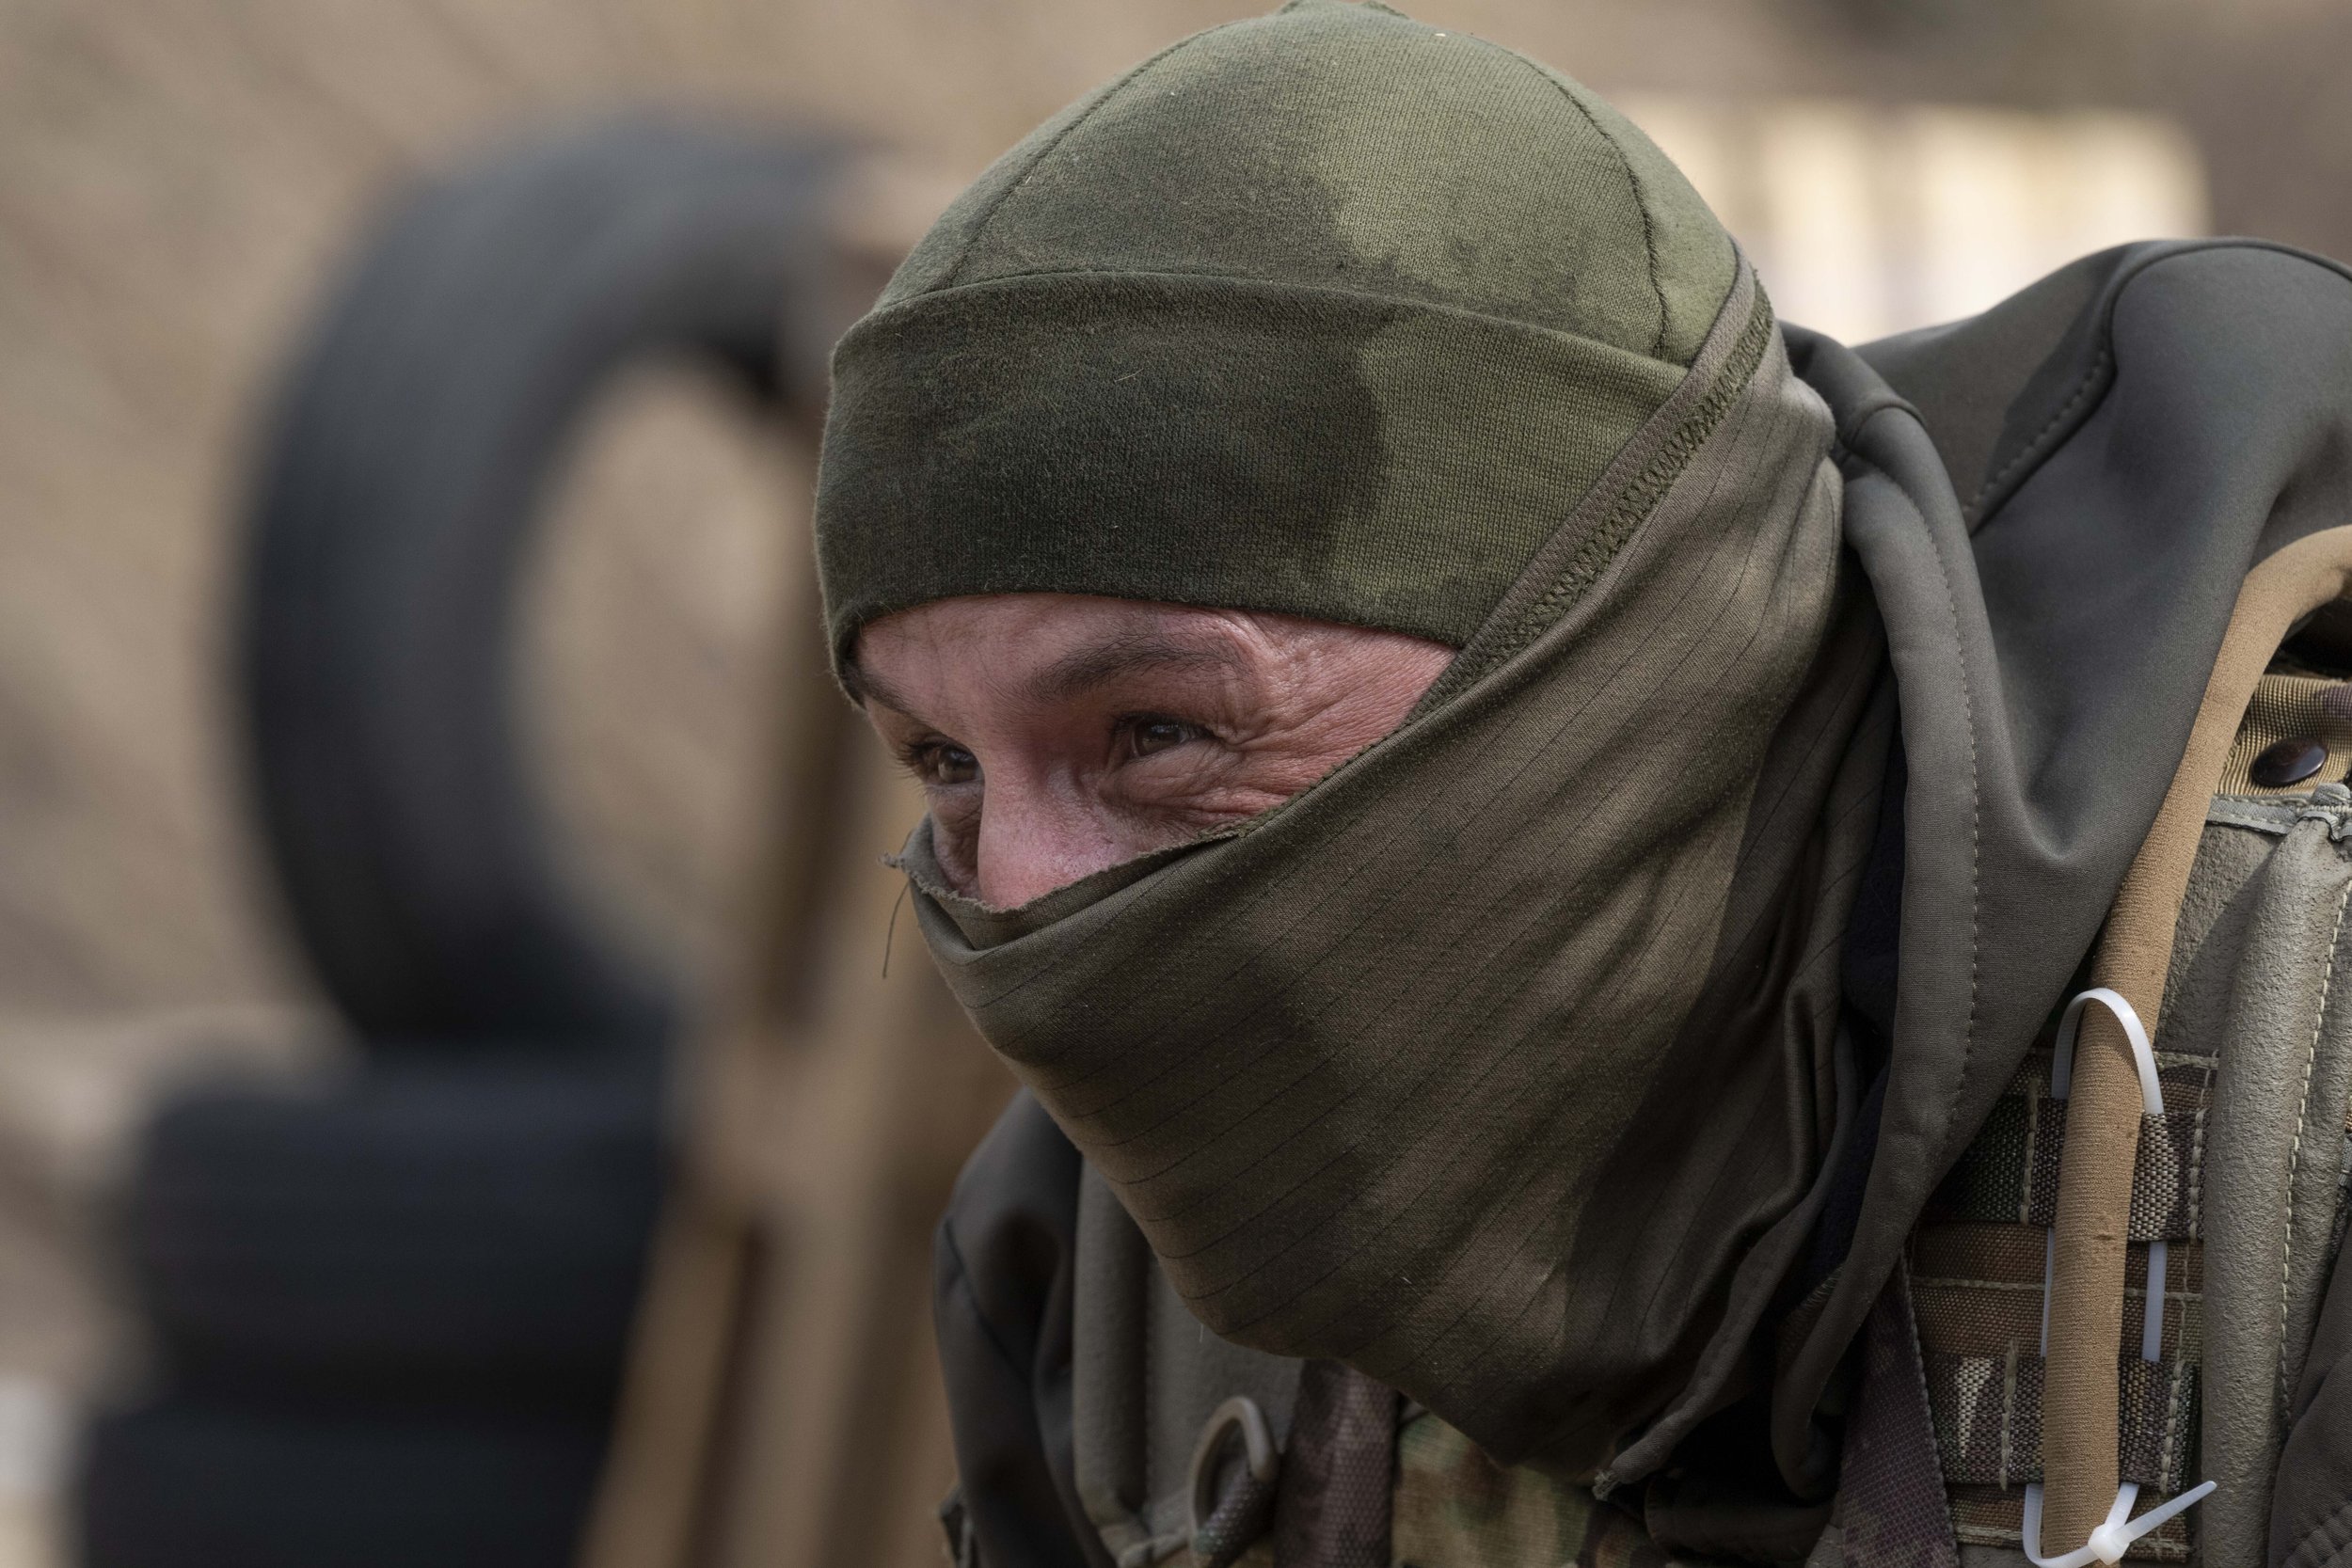  Ukrainian soldiers of the 103rd Separate Brigade of the Territorial Defense of the Armed Forces, attend a training exercise, at an undisclosed location near Lviv, western Ukraine, Tuesday, March 29, 2022. (AP Photo/Nariman El-Mofty) 